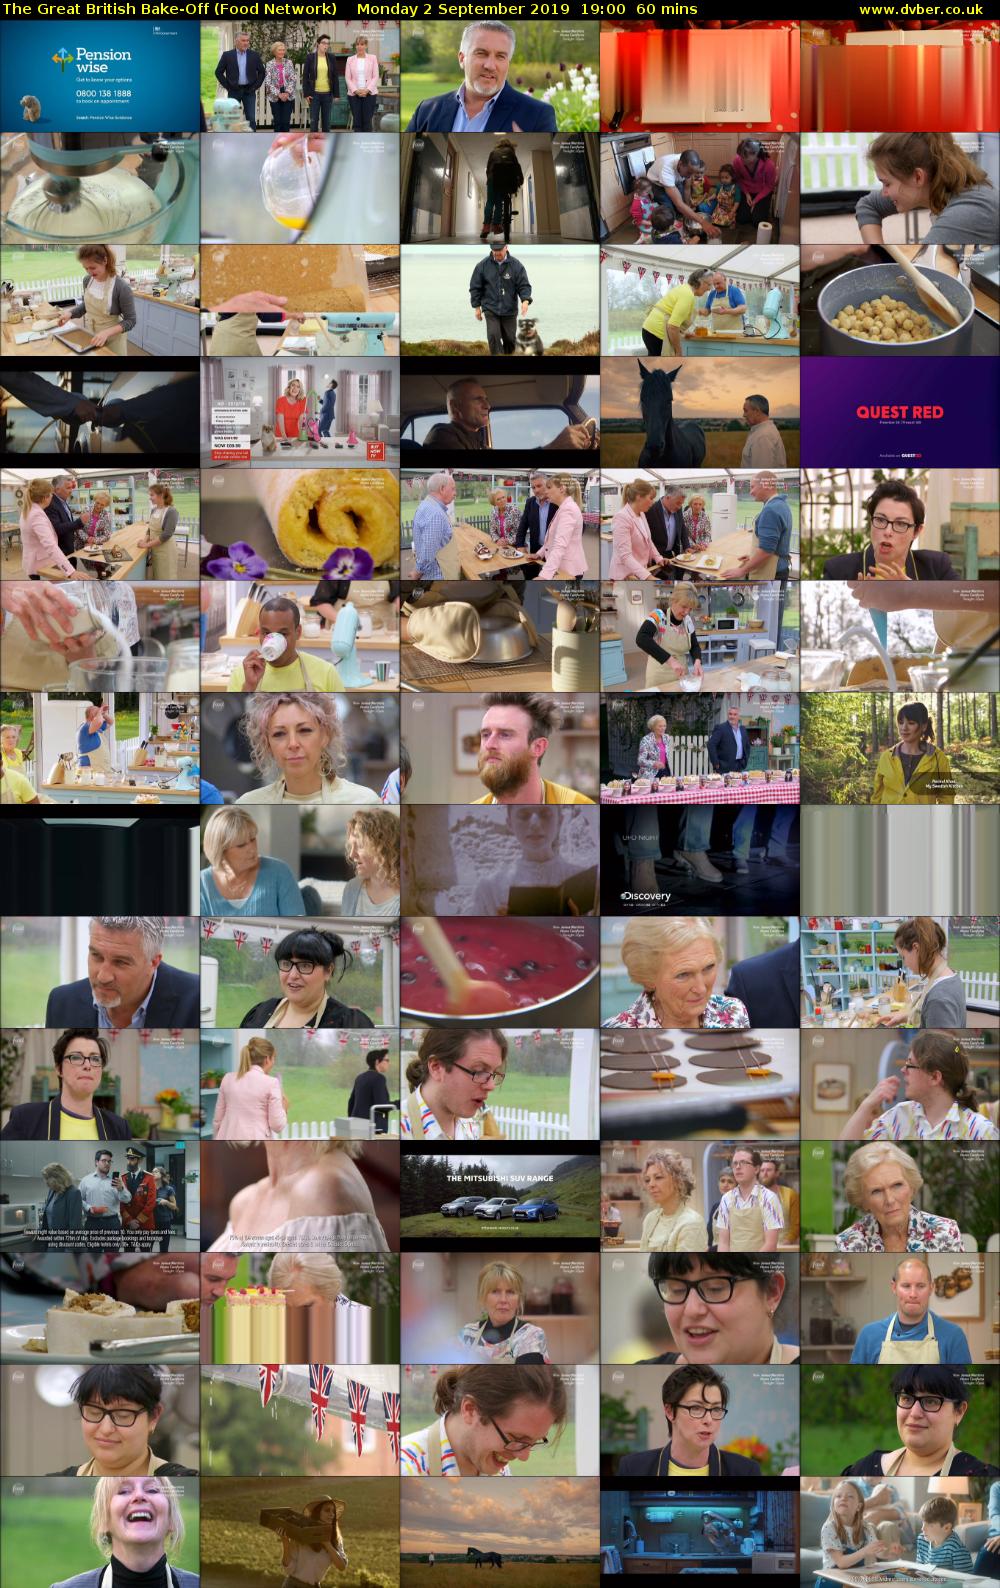 The Great British Bake-Off (Food Network) Monday 2 September 2019 19:00 - 20:00